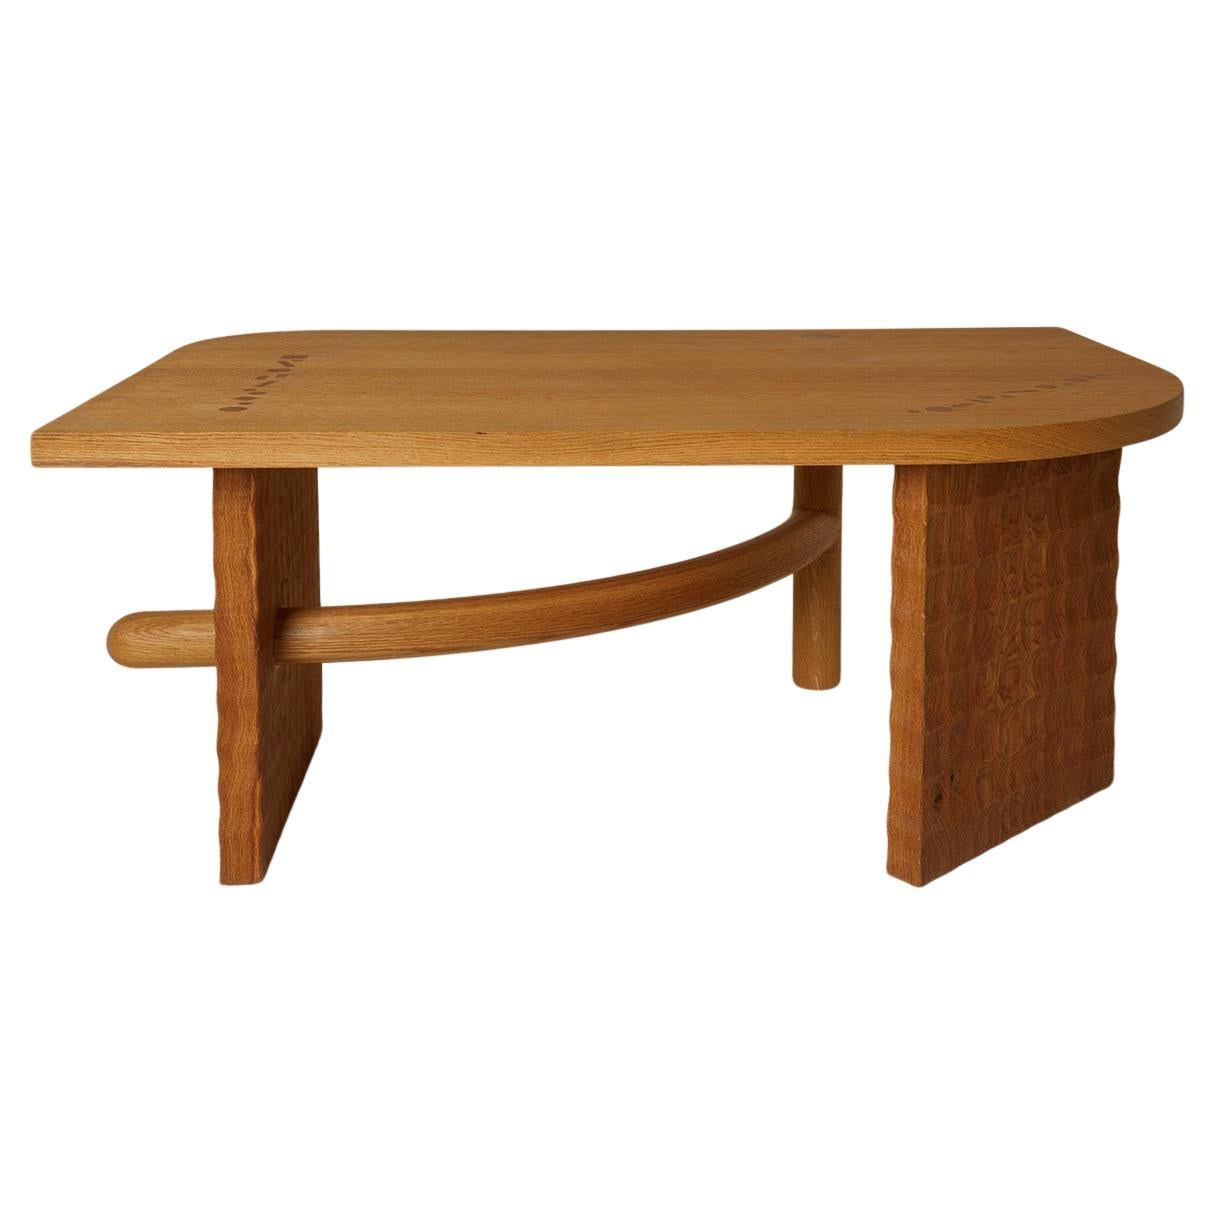 Hand-Carved Sculptural White Oak Sabbagh Billot Coffee Table, Plant-Based Finish